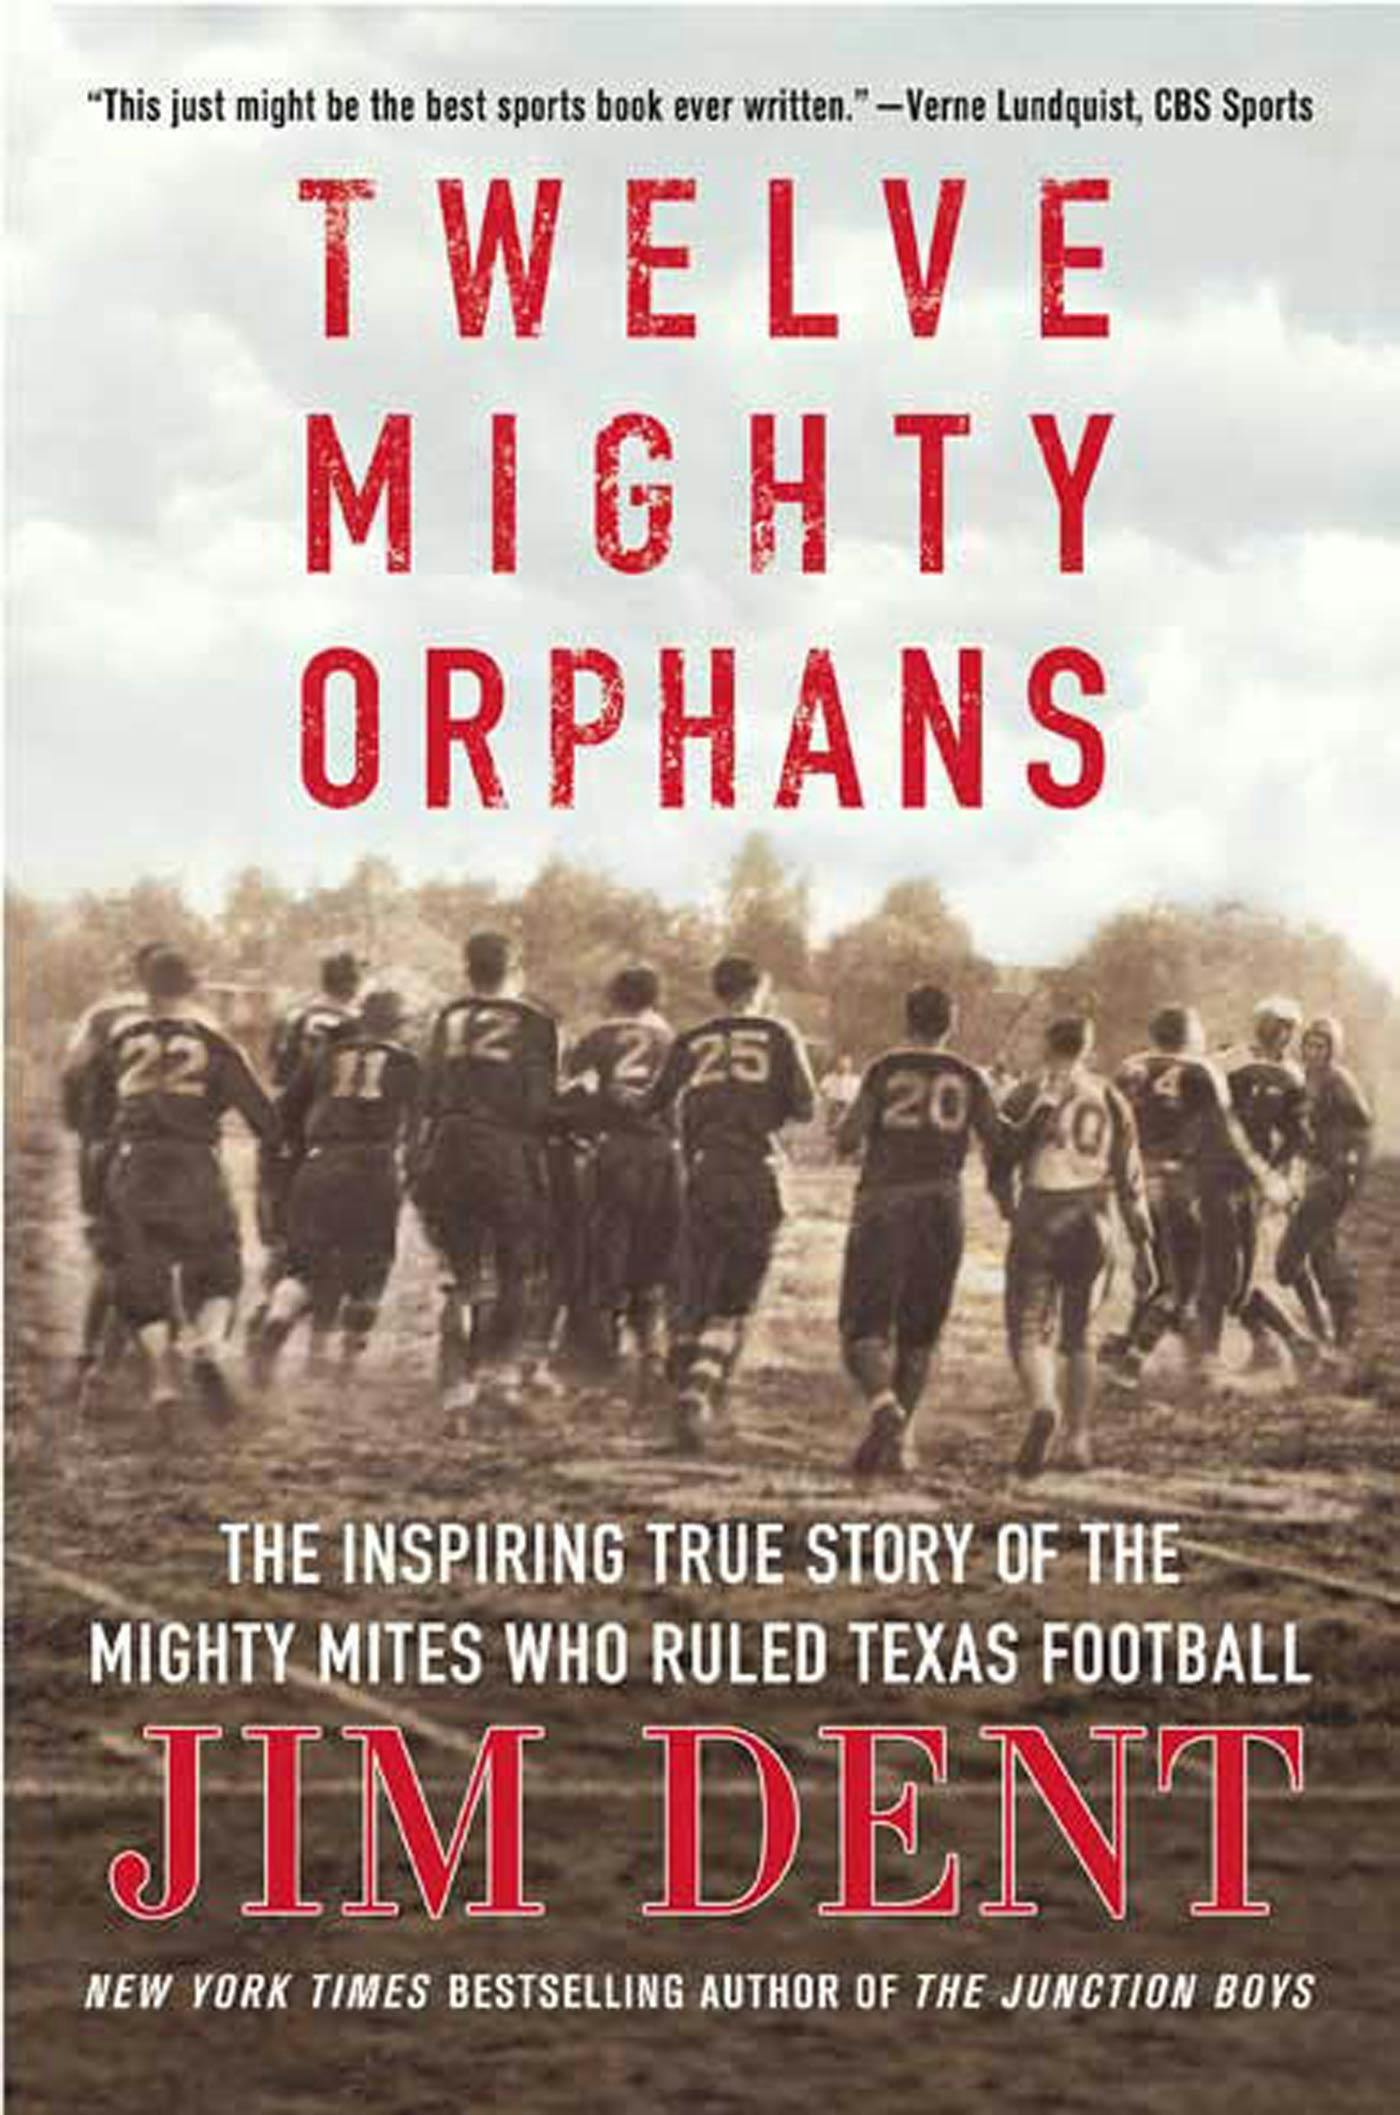 12 mighty orphans book review